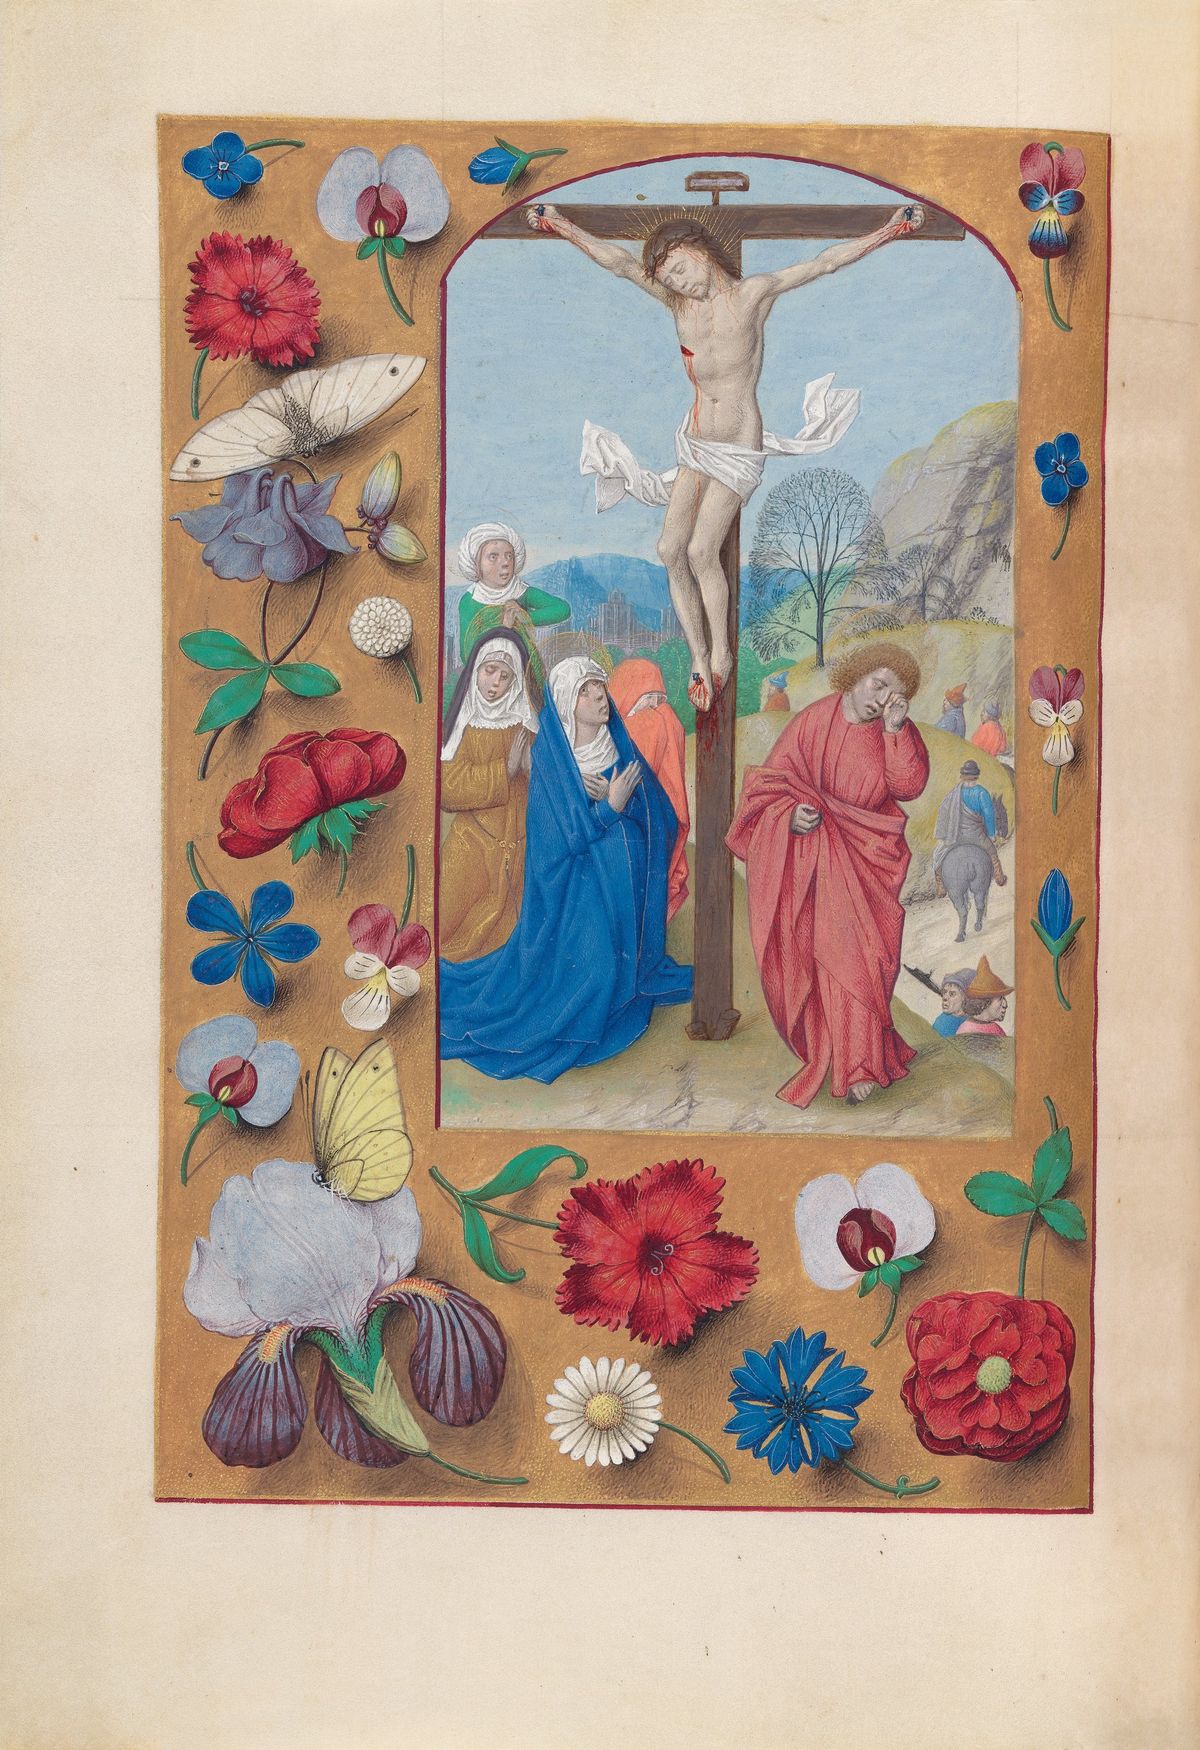 Crucifixion by Master of the First Prayerbook of Maximillian and Associates (1500) - Public Domain Catholic Painting